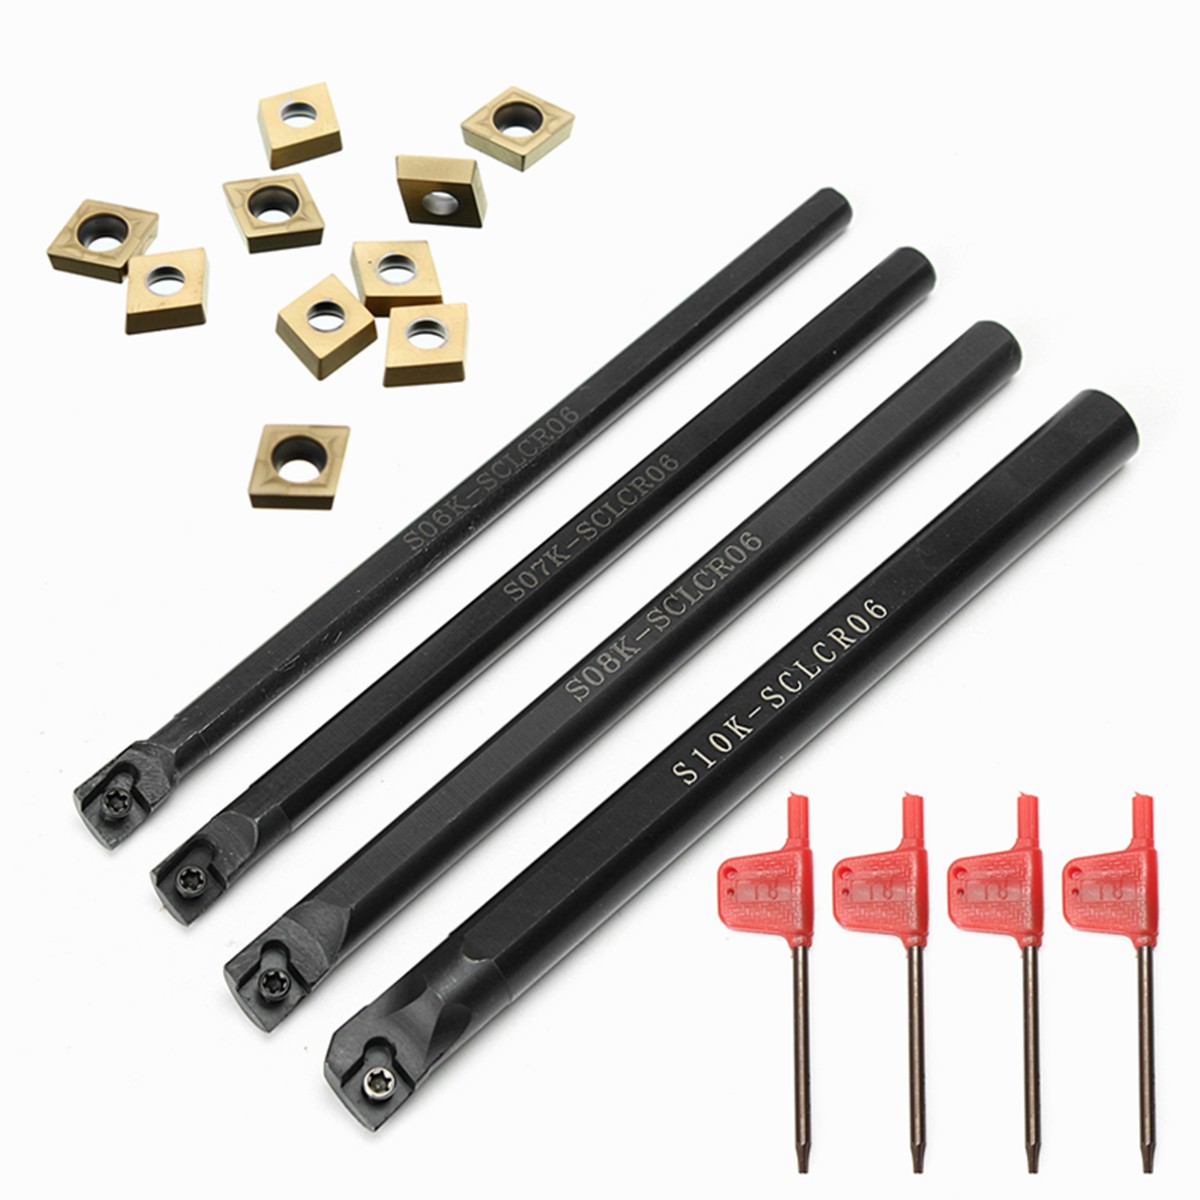 

4pcs 6/7/8/10mm SCLCR06 Turning Tool Holder Lathe Boring Bar With 10pcs CCMT060204 Inserts